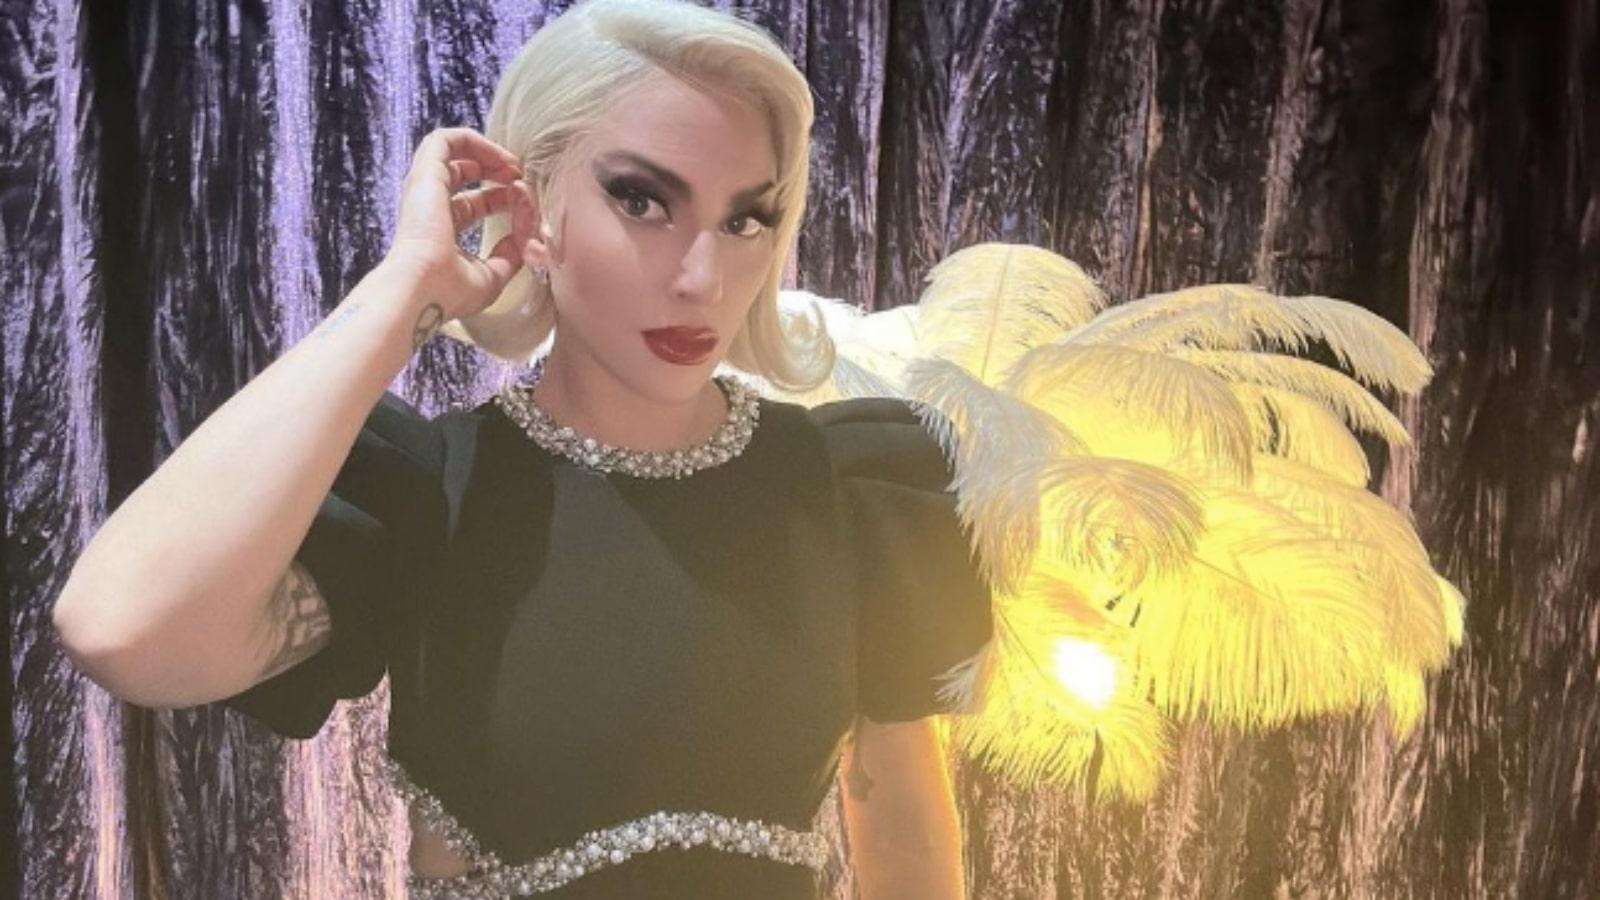 Lady Gaga posing in a black dress with diamonds in front of a feathered light.